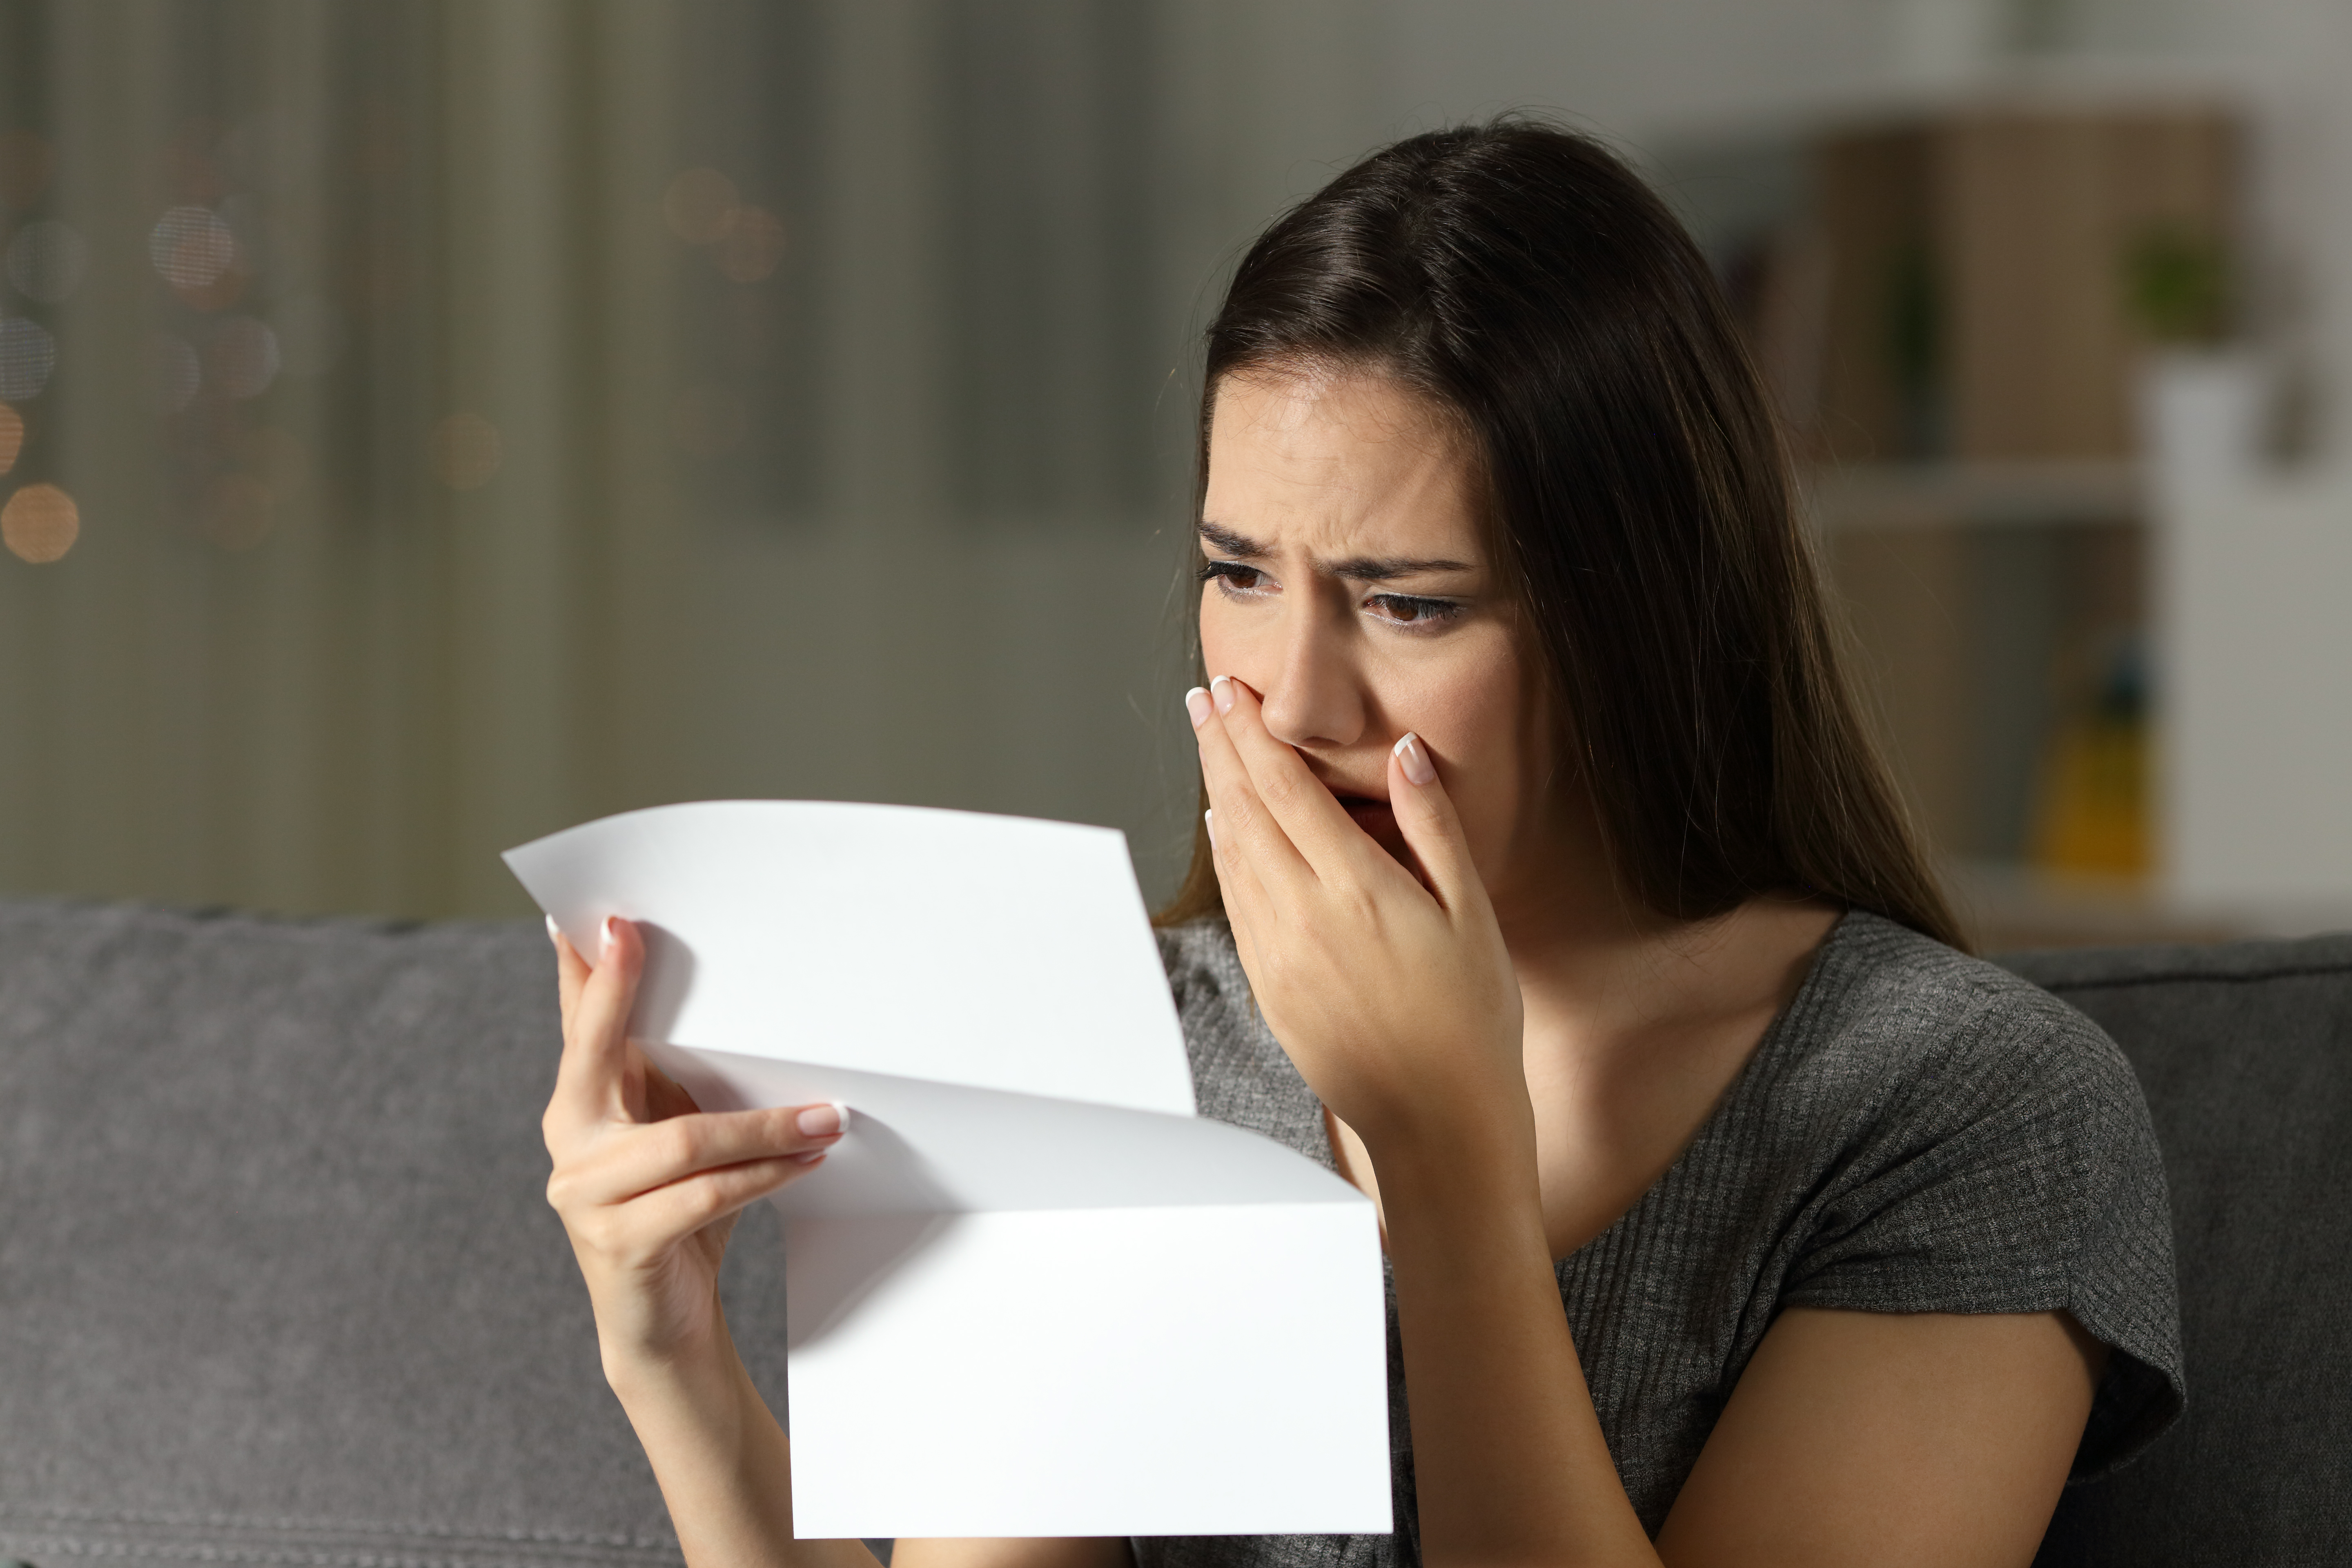 Sad woman complaining reading a letter. | Source: Shutterstock